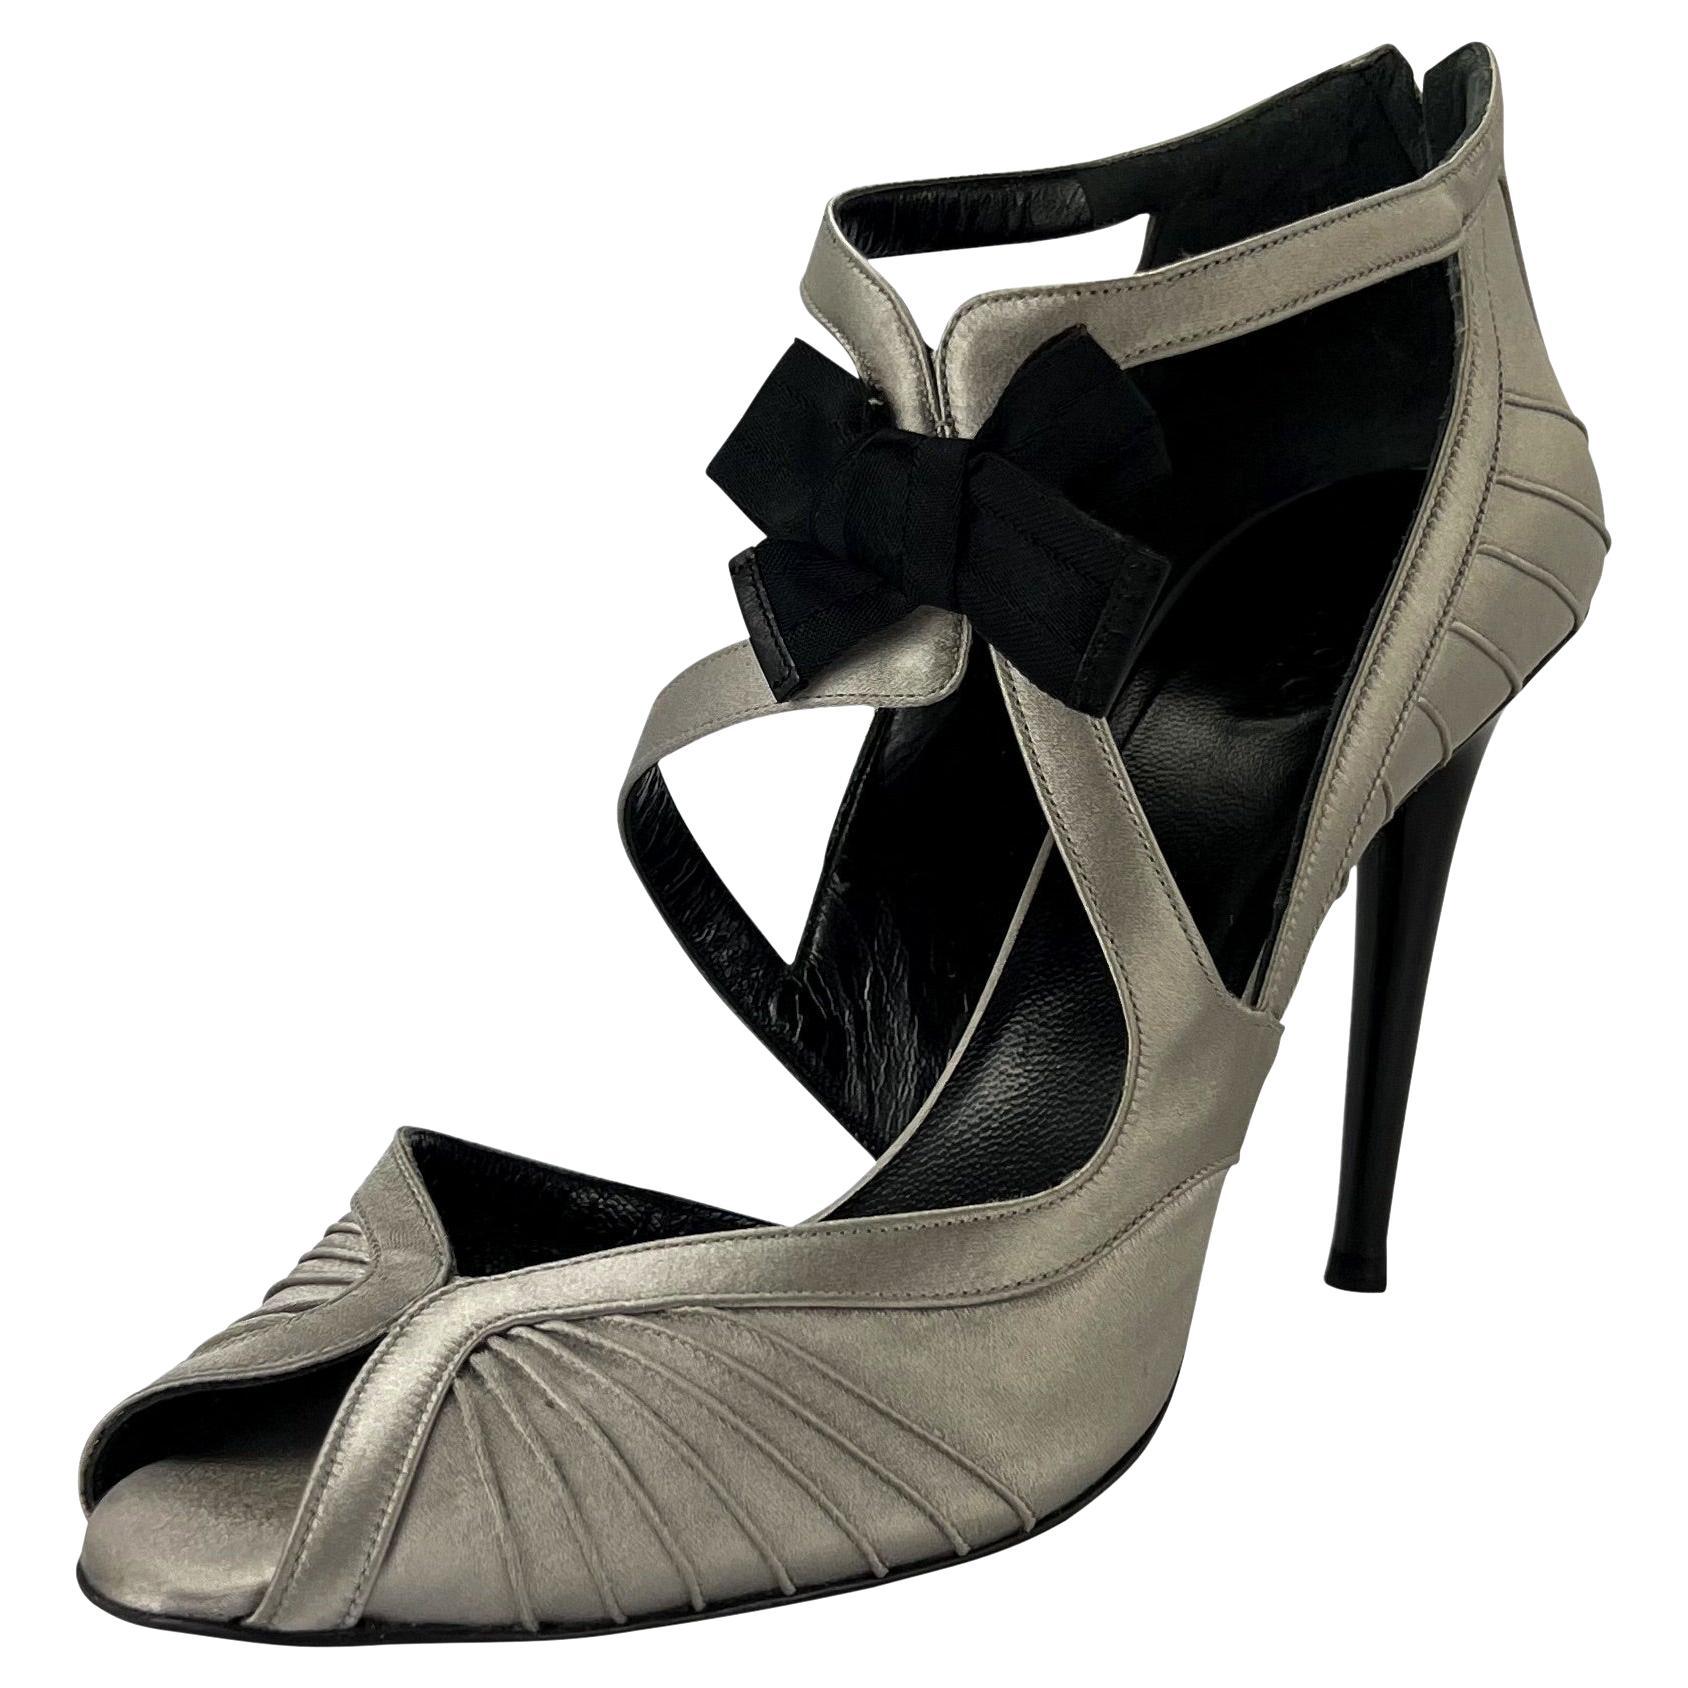 S/S 2004 Gucci by Tom Ford Grey Satin Bow Heel Size 9 B